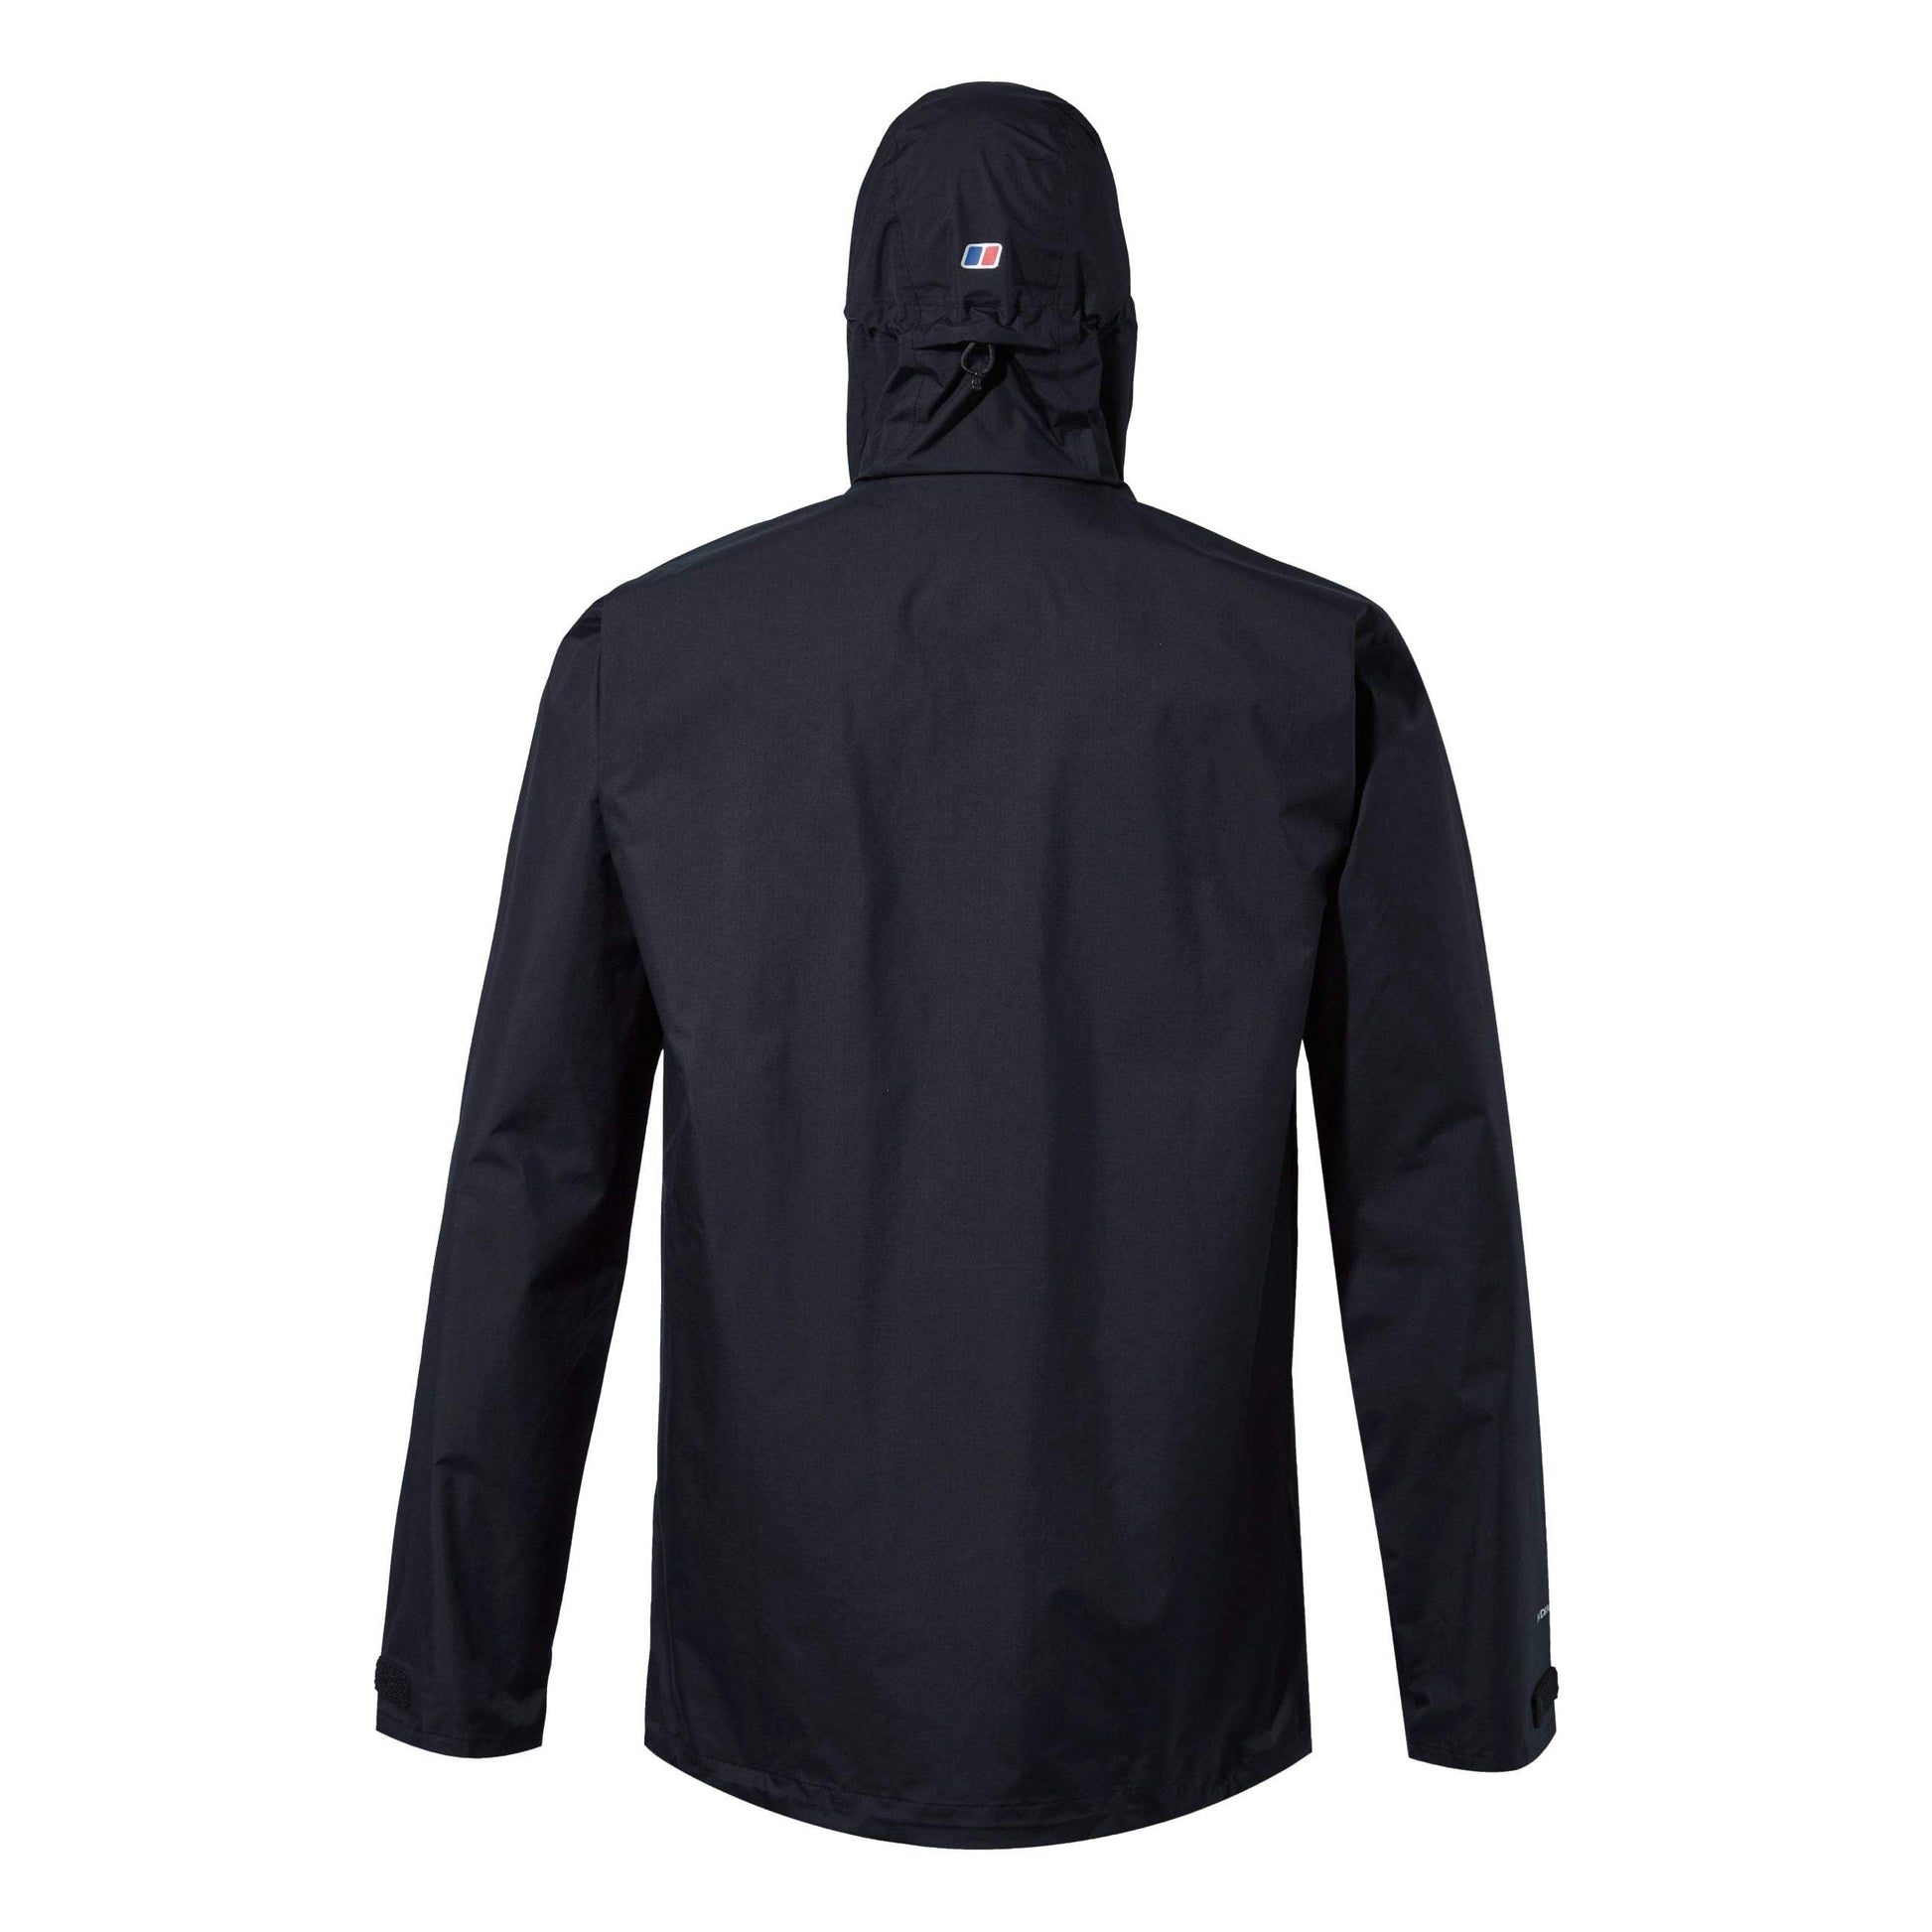 Berghaus Men’s Deluge Pro 2.0 Shell Jacket - The Luxury Promotional Gifts Company Limited